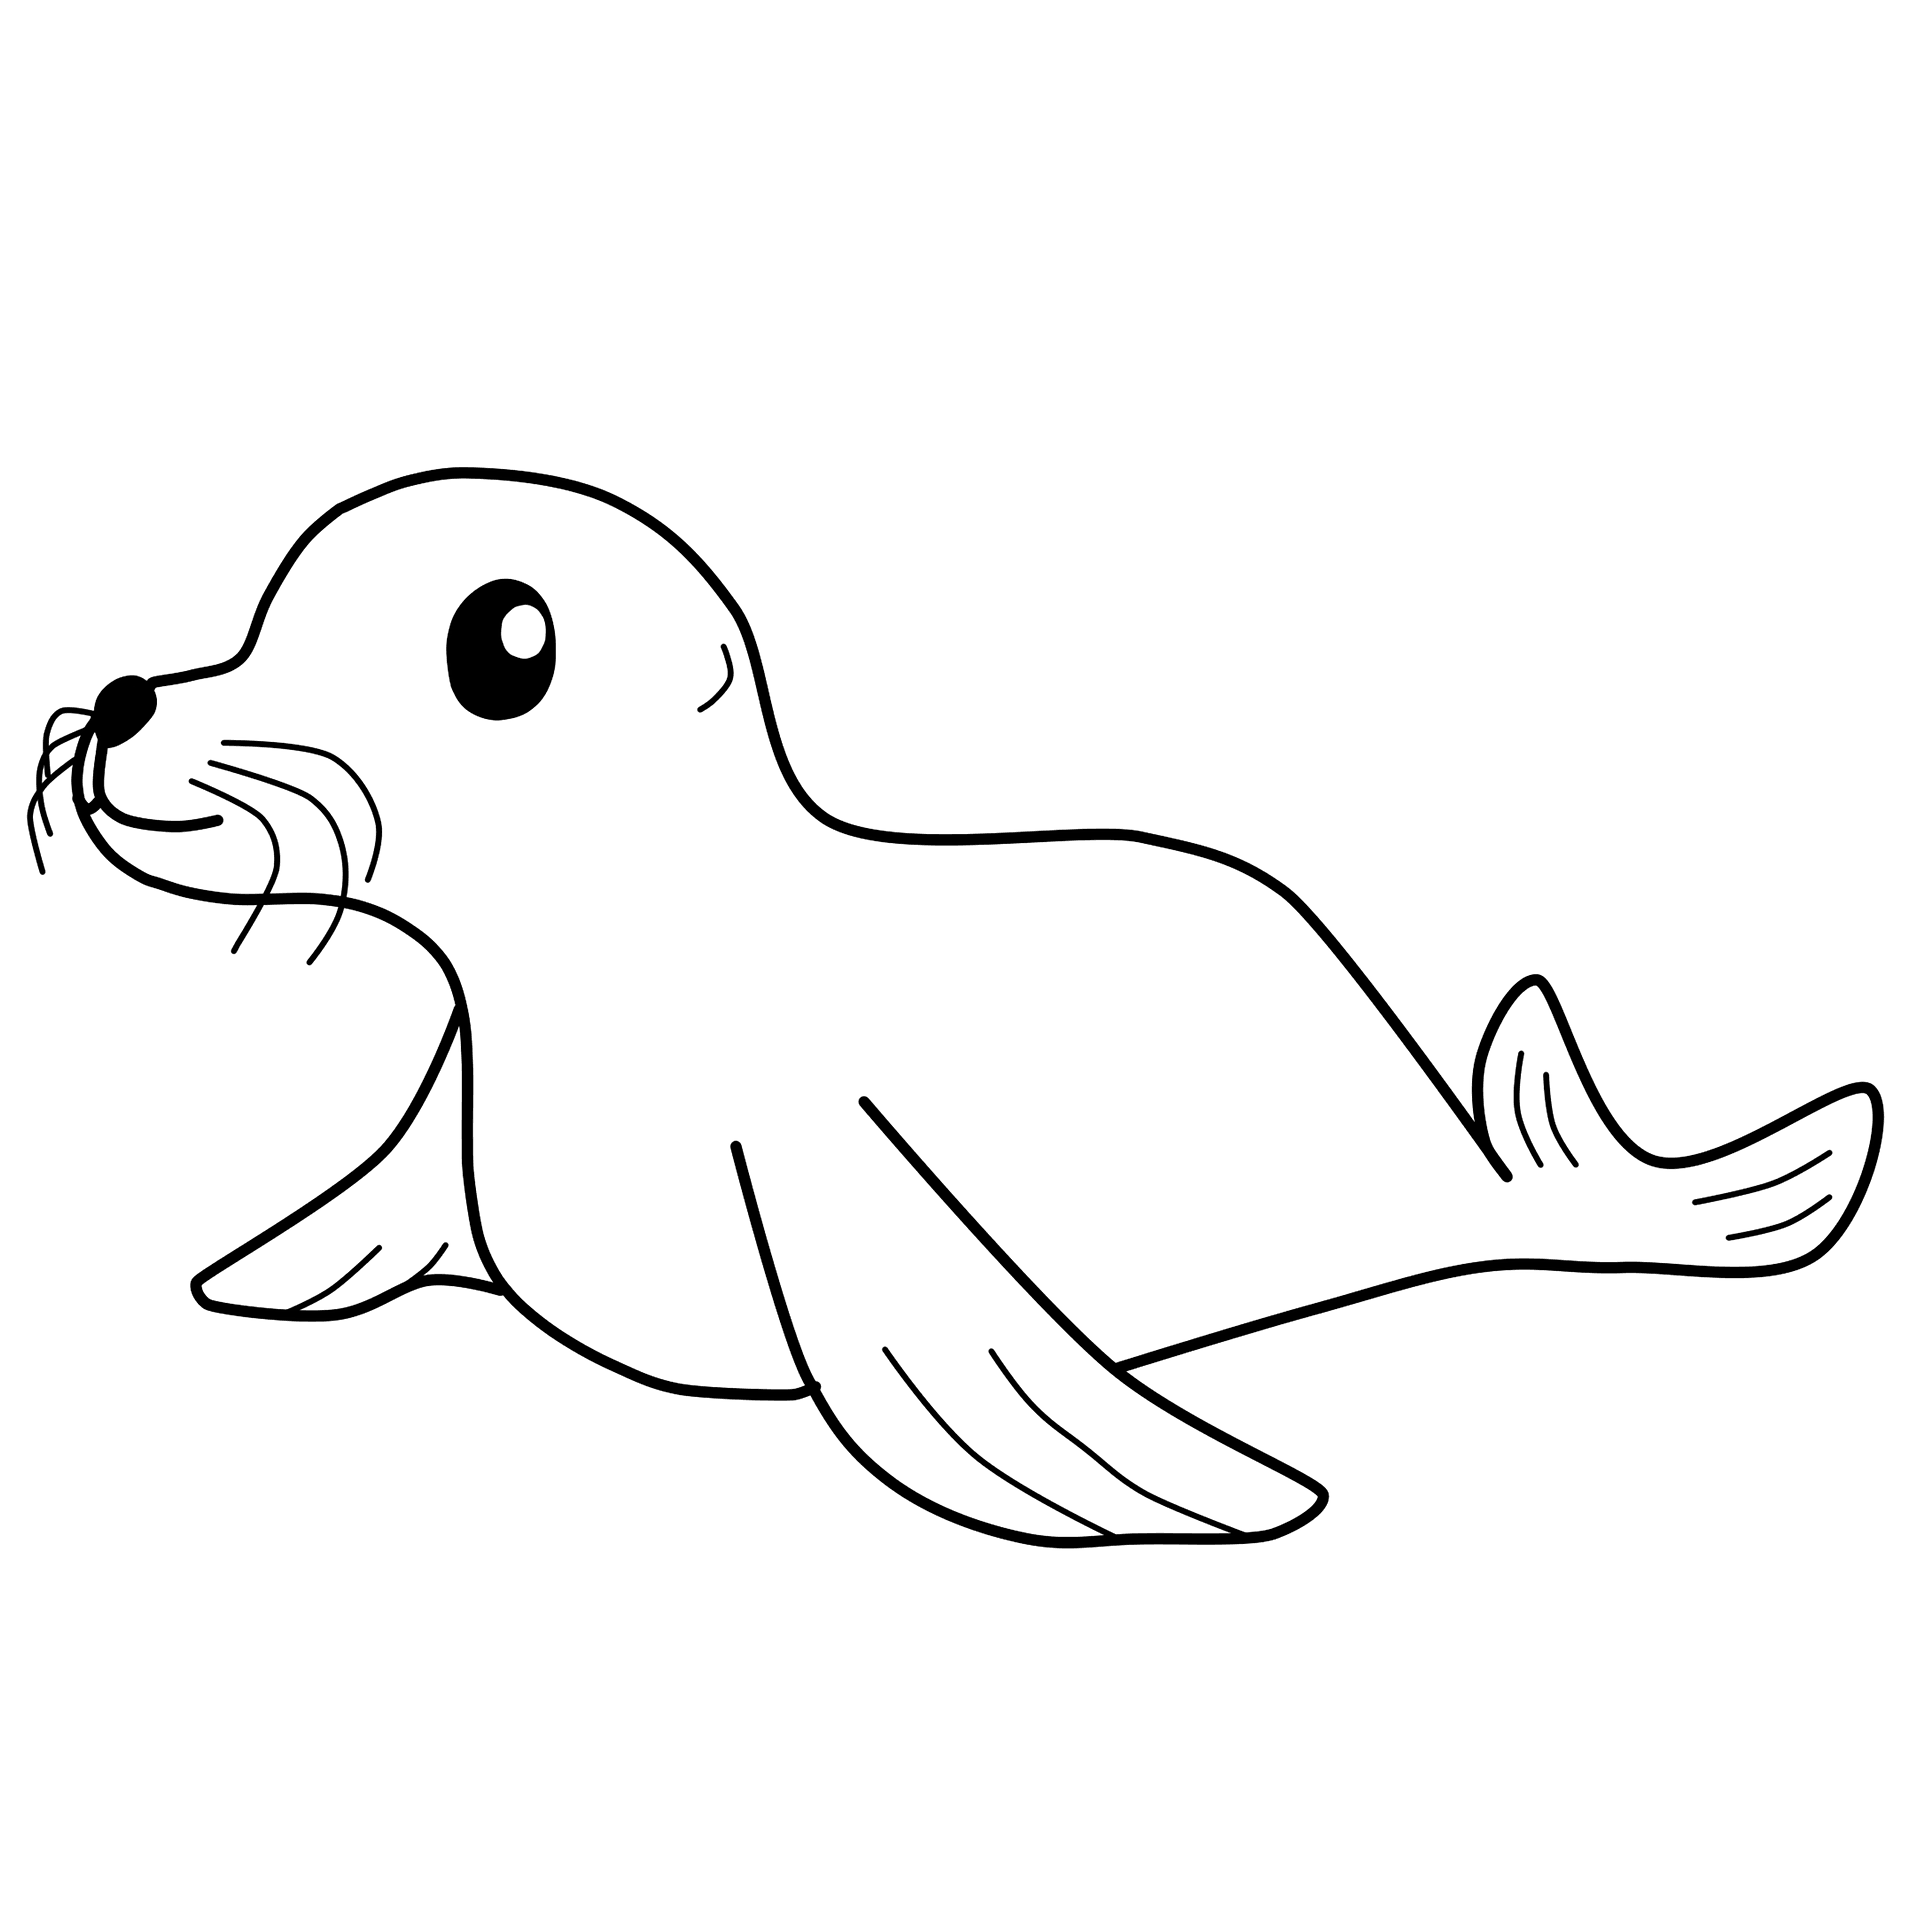 Coloring page of a seal